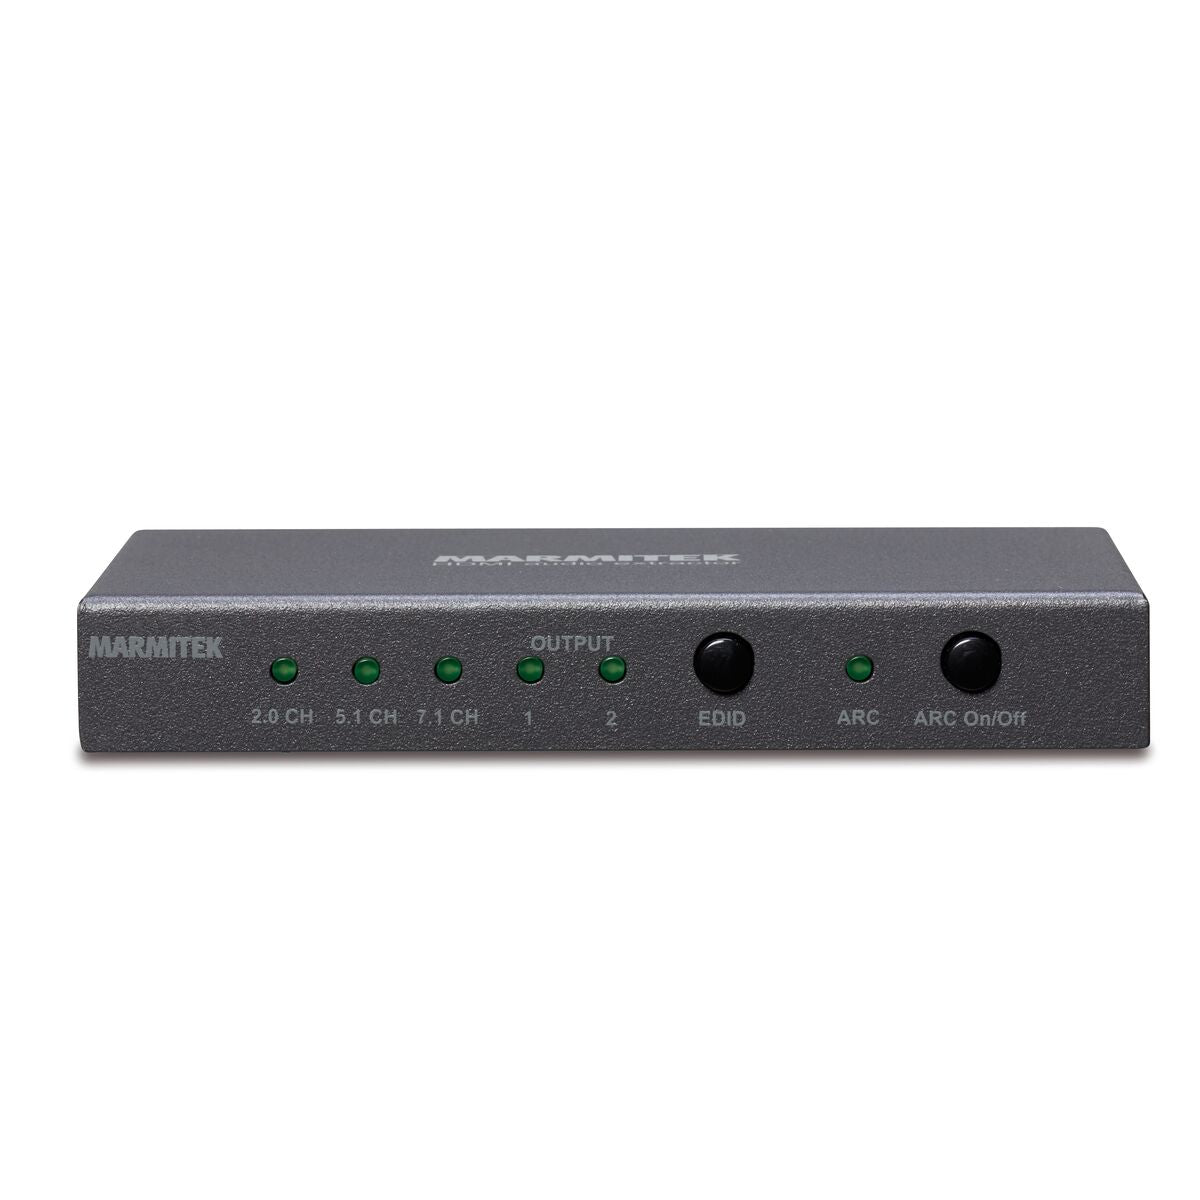 Connect AE24 UHD 2.0 - HDMI audio extractor 4K - 4K60 - HDR - ARC - 18 Gbps